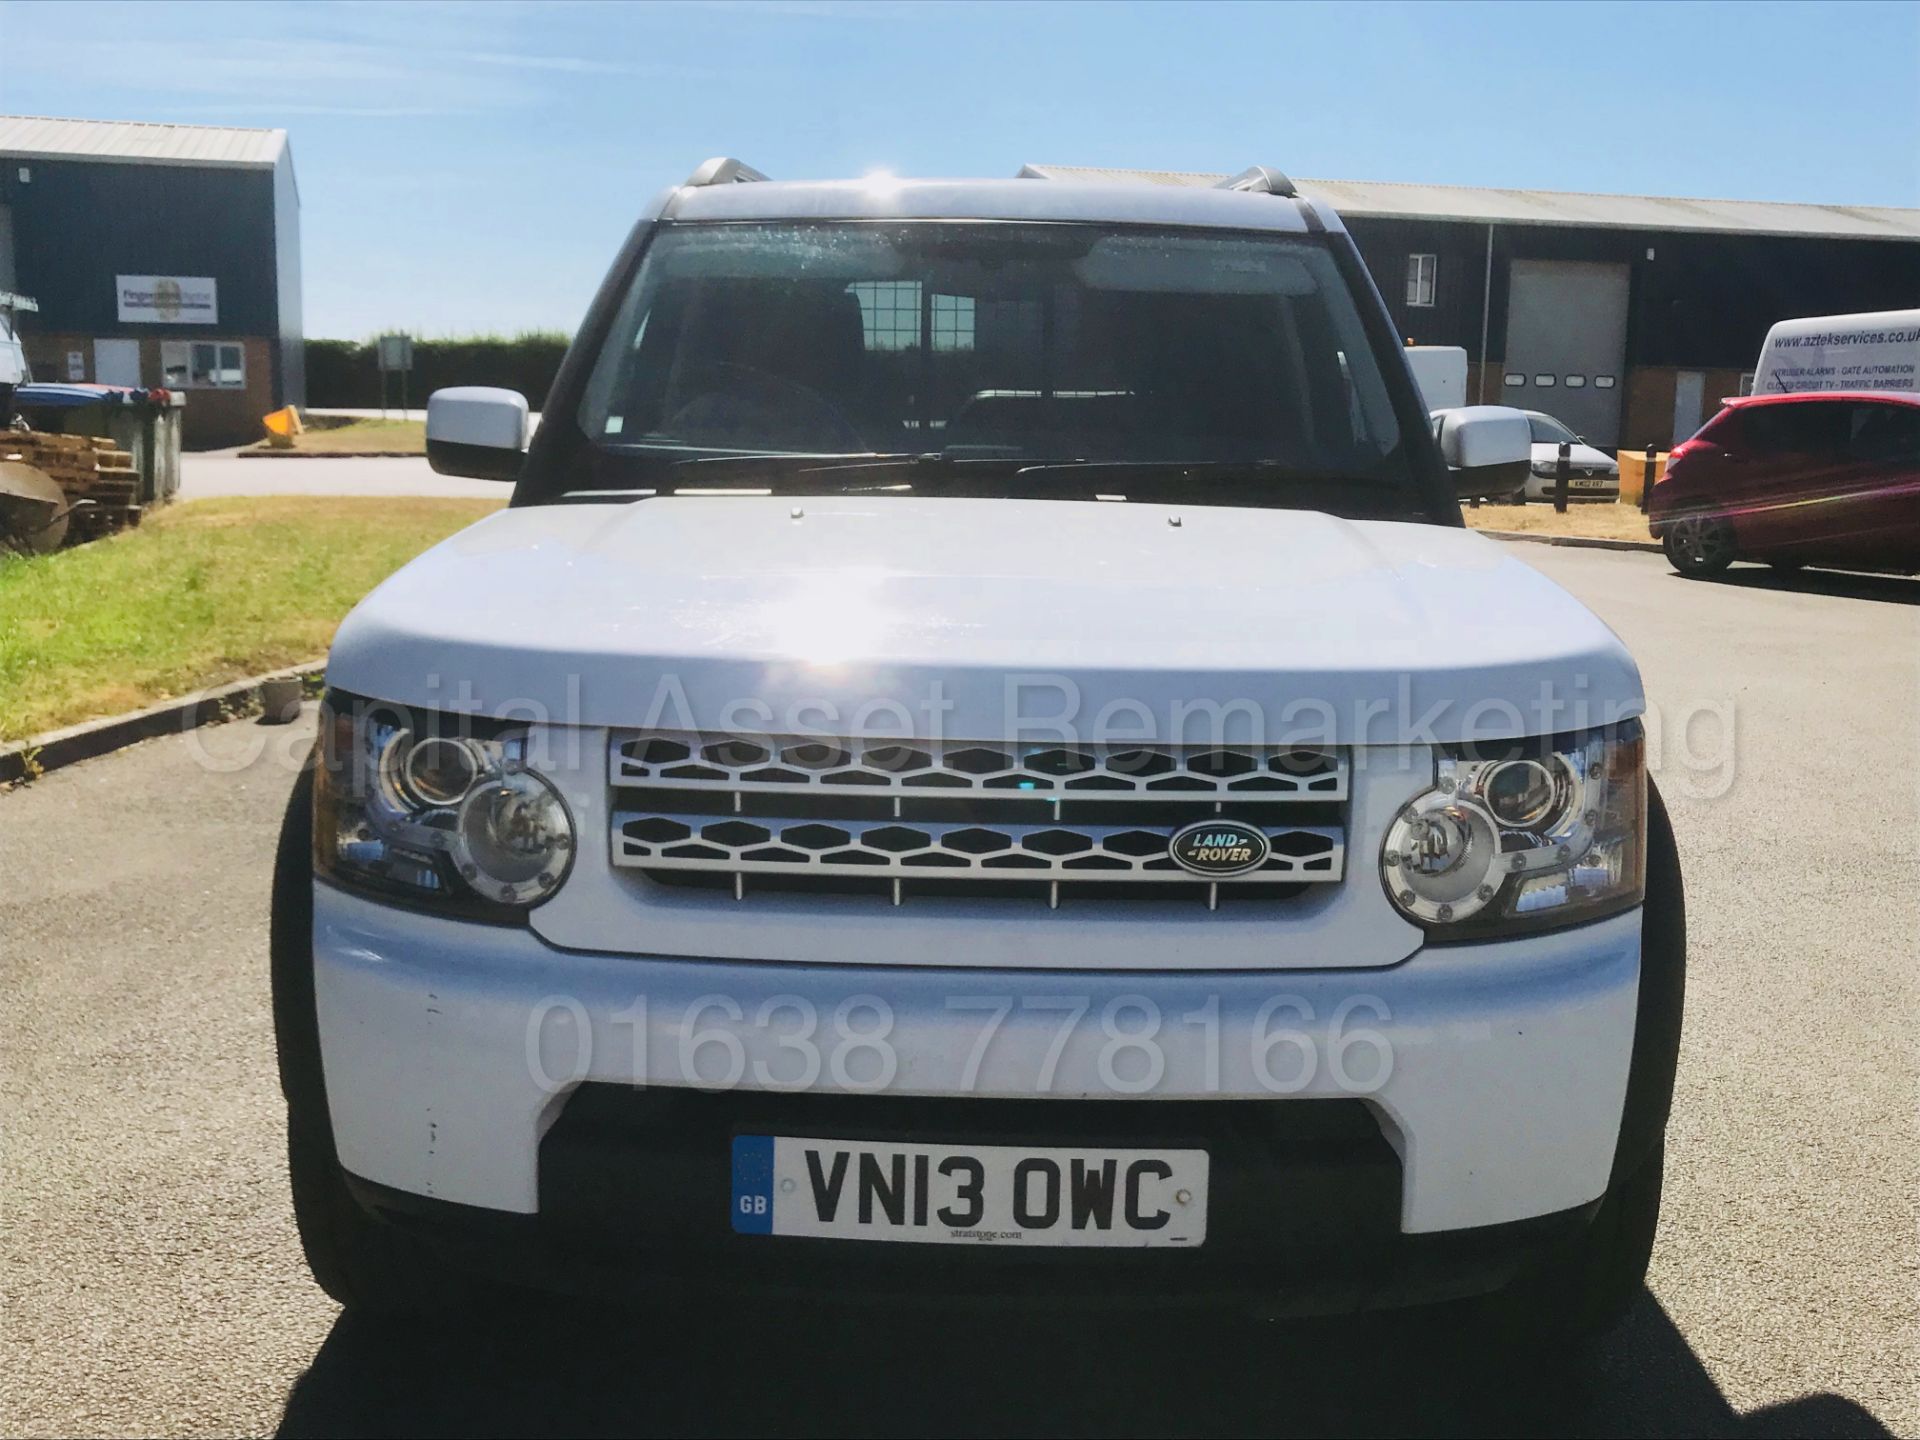 (On Sale) LAND ROVER DISCOVERY 4 **COMMERCIAL VAN**(2013 - 13 REG) '3.0 TDV6 - 210 BHP - AUTO' - Image 4 of 38